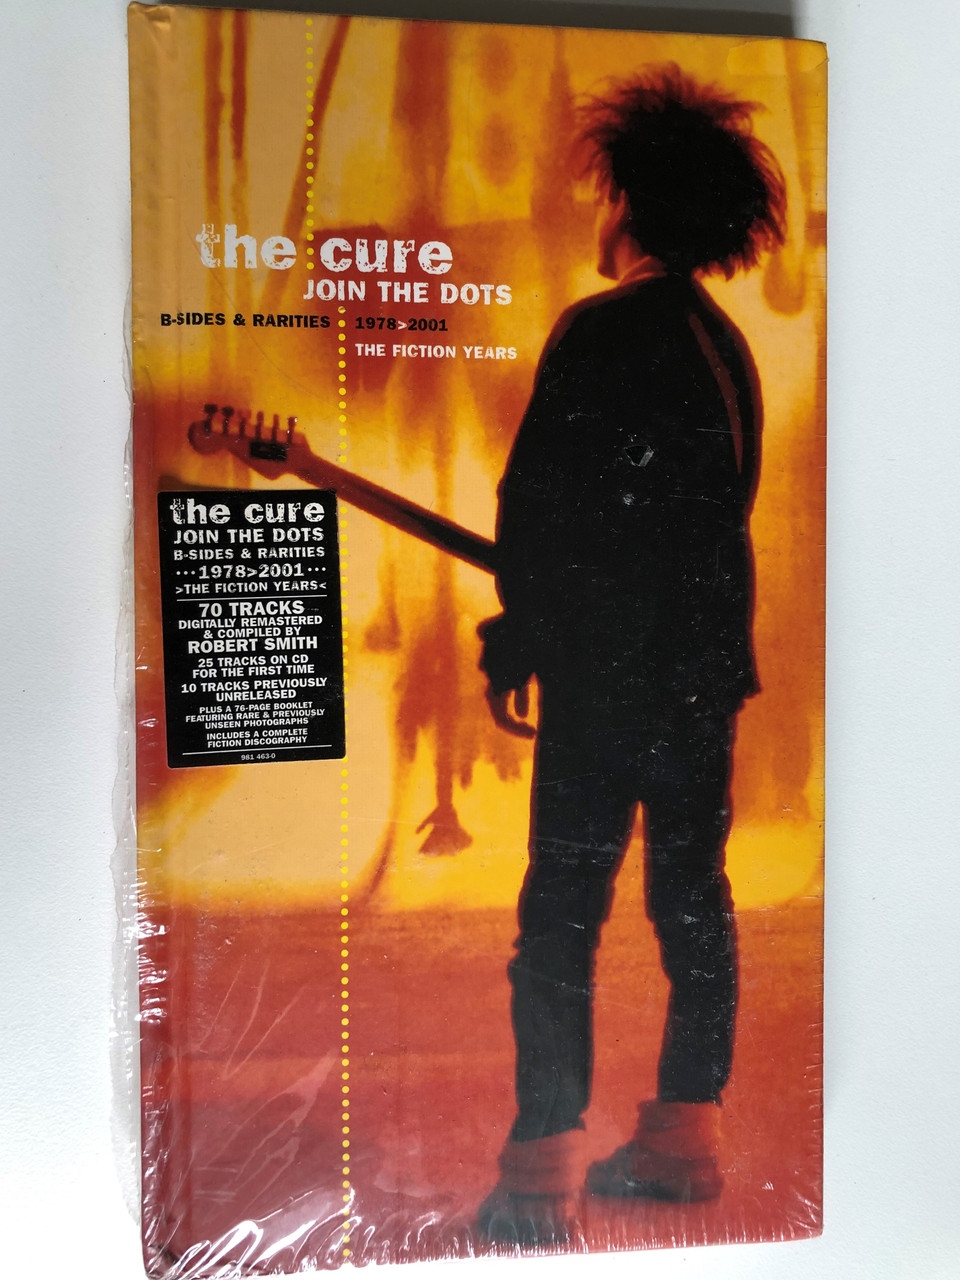 https://cdn10.bigcommerce.com/s-62bdpkt7pb/products/0/images/255909/The_Cure_Join_The_Dots_B-Sides_Rarities_19782001_The_Fiction_Years_70_Tracks_Digitally_Remastered_Compiled_By_Robert_Smith_25_Tracks_On_CD_For_The_First_Time_Fiction_Records_4x_Aud_1__27008.1665499160.1280.1280.JPG?c=2&_gl=1*hr59c3*_ga*MjA2NTIxMjE2MC4xNTkwNTEyNTMy*_ga_WS2VZYPC6G*MTY2NTQ5NDYwOS41ODkuMS4xNjY1NDk4NTIxLjE0LjAuMA..